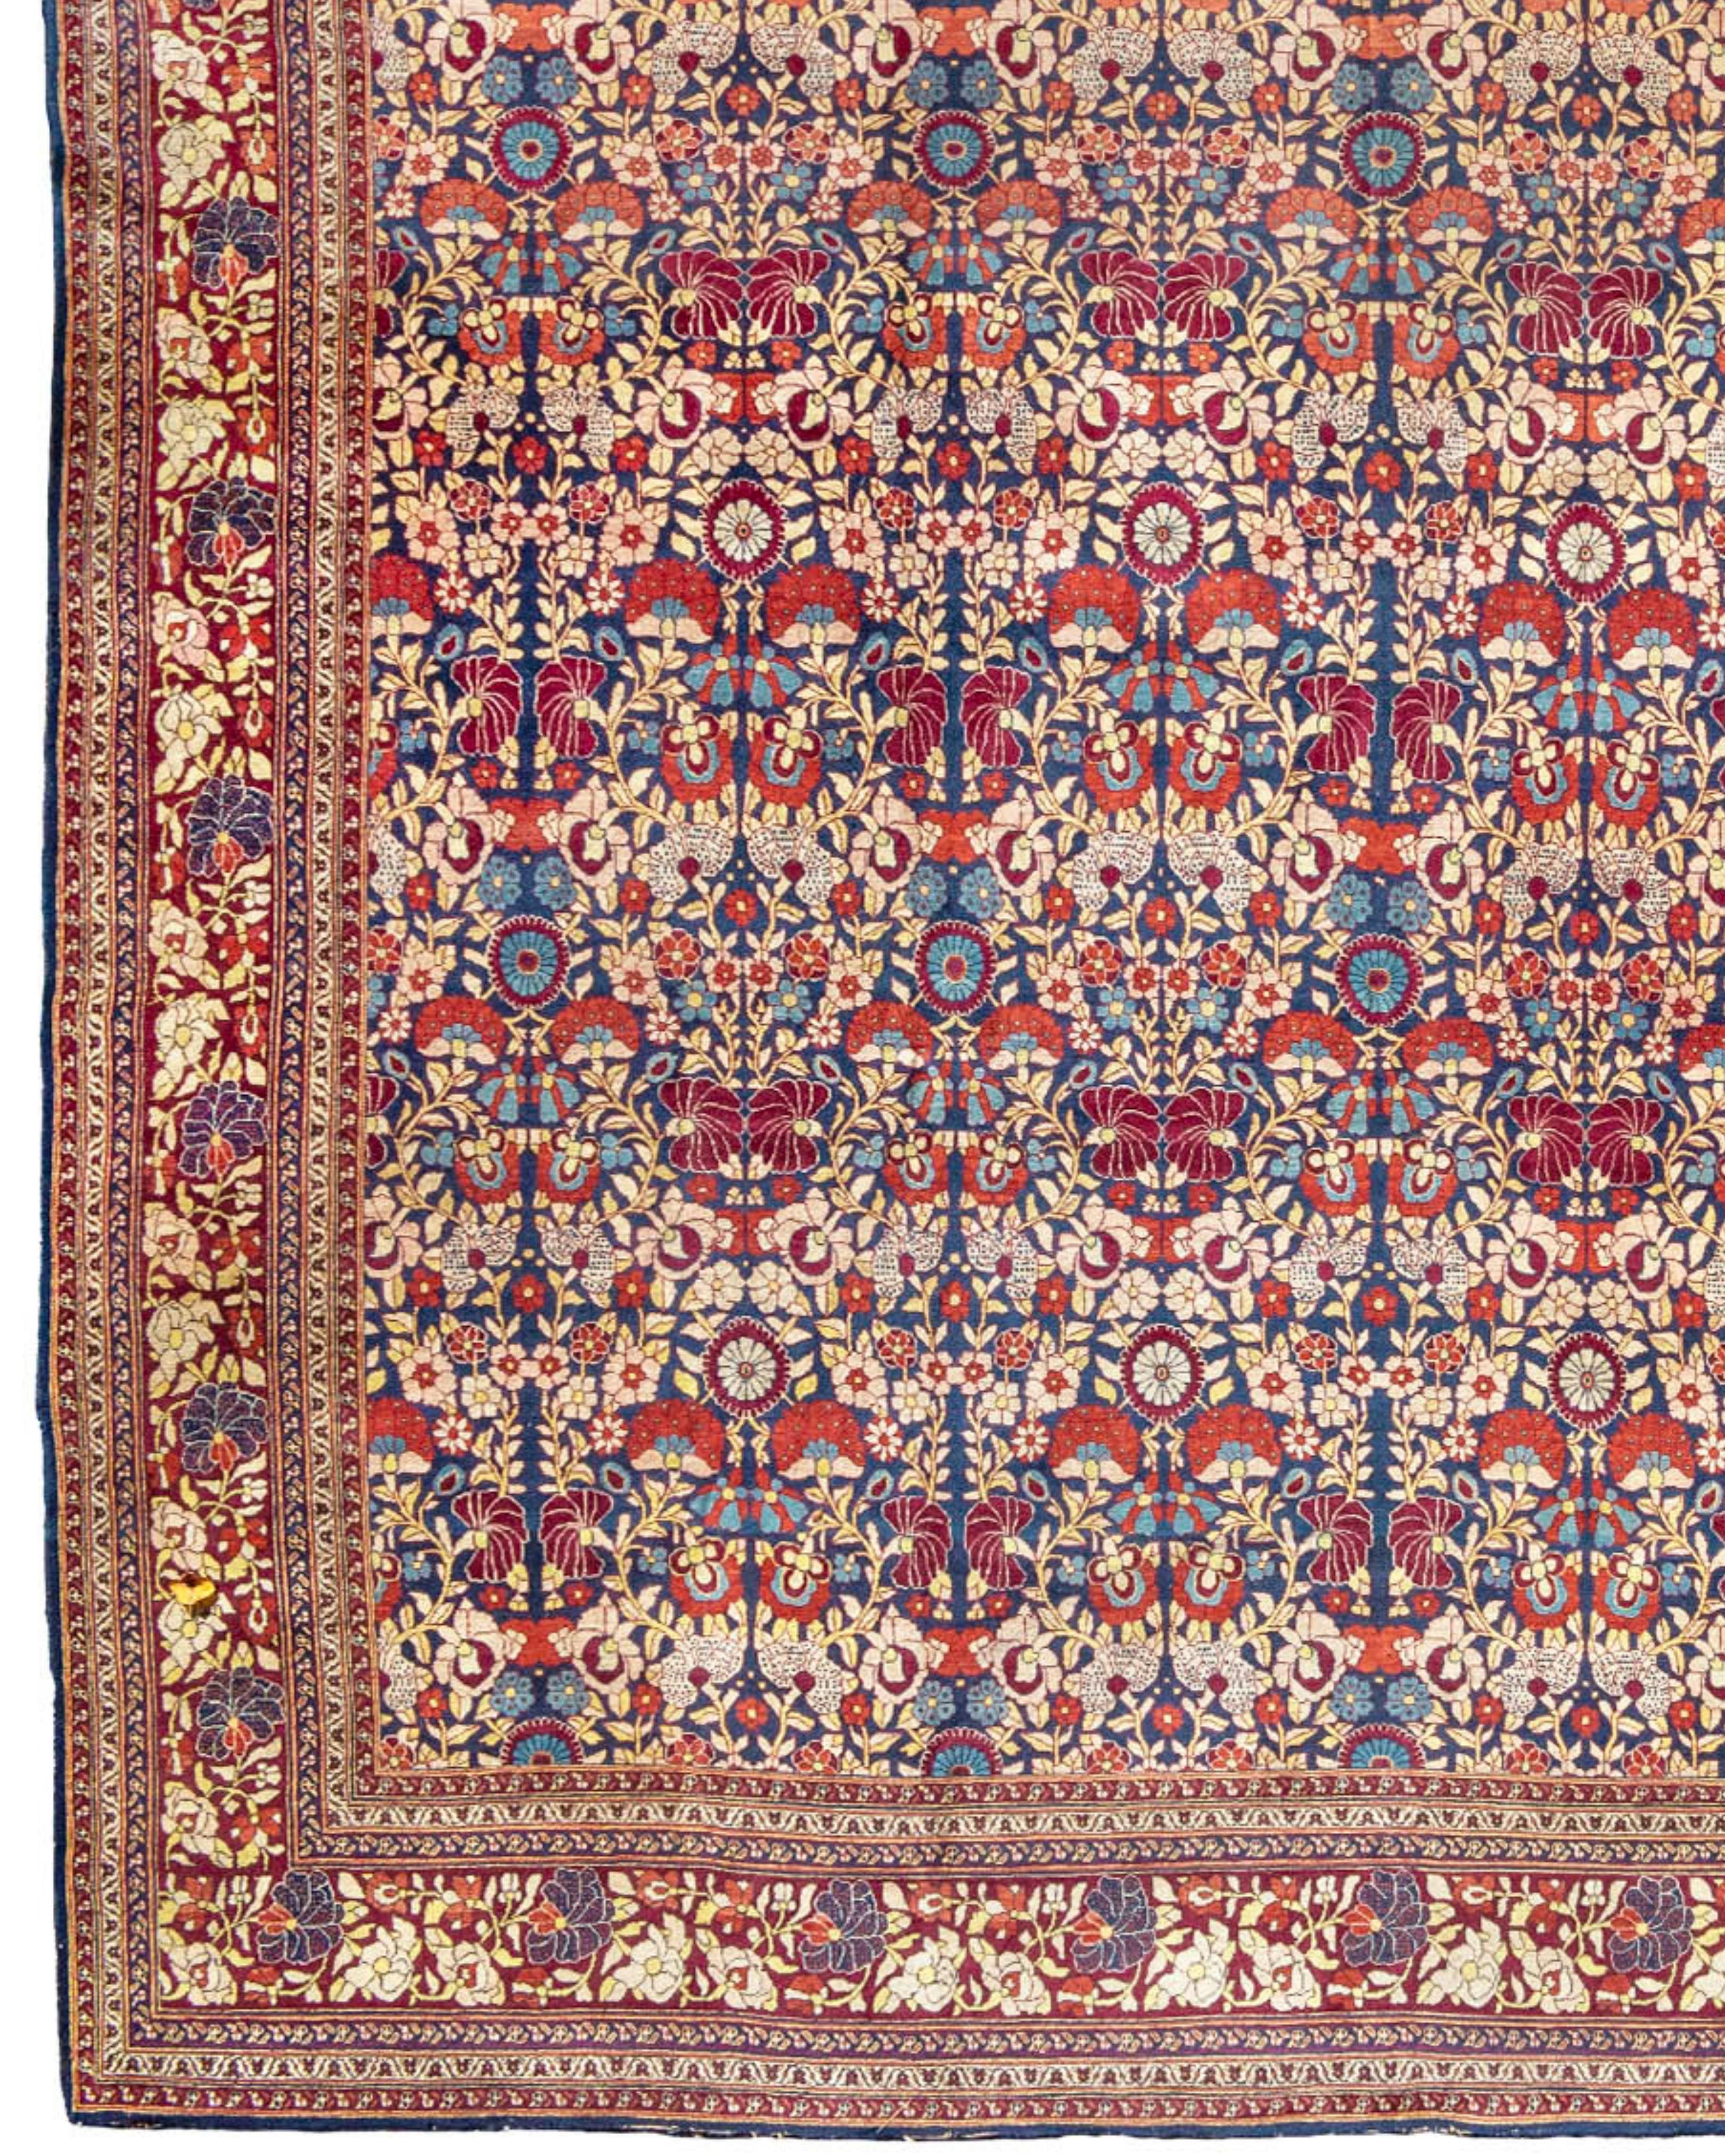 Hand-Knotted Antique Large Oversized Persian Mashad Carpet, c. 1900 For Sale